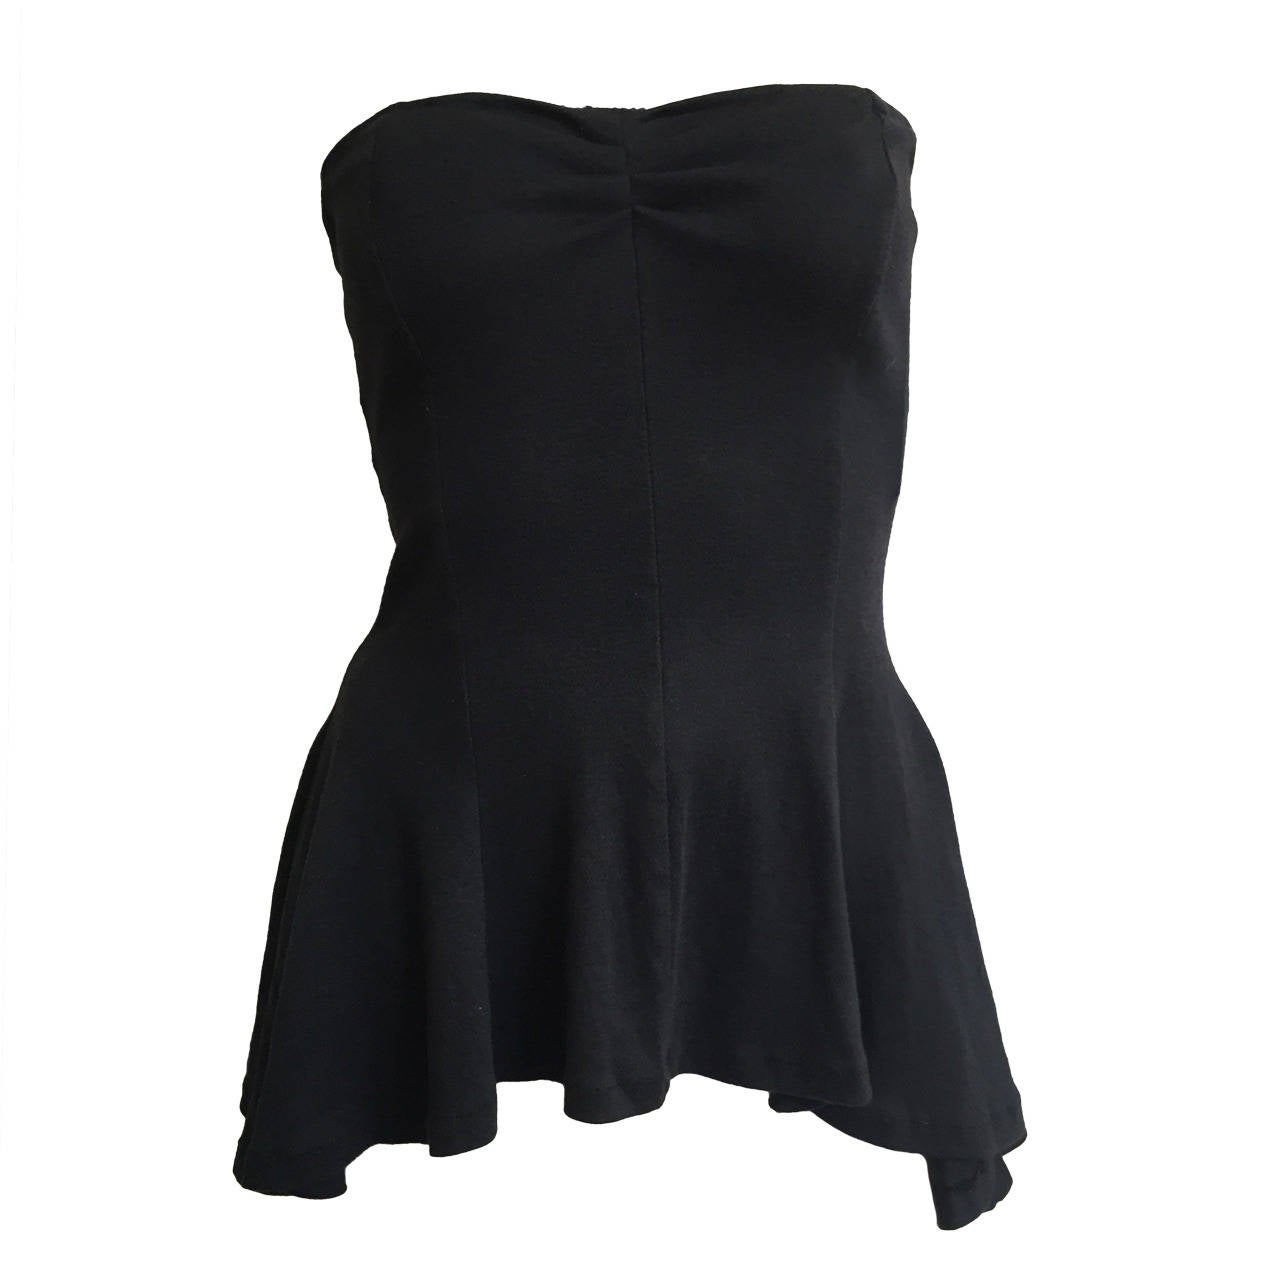 Norma Kamali Black Cotton Strapless Top Size Small. For Sale